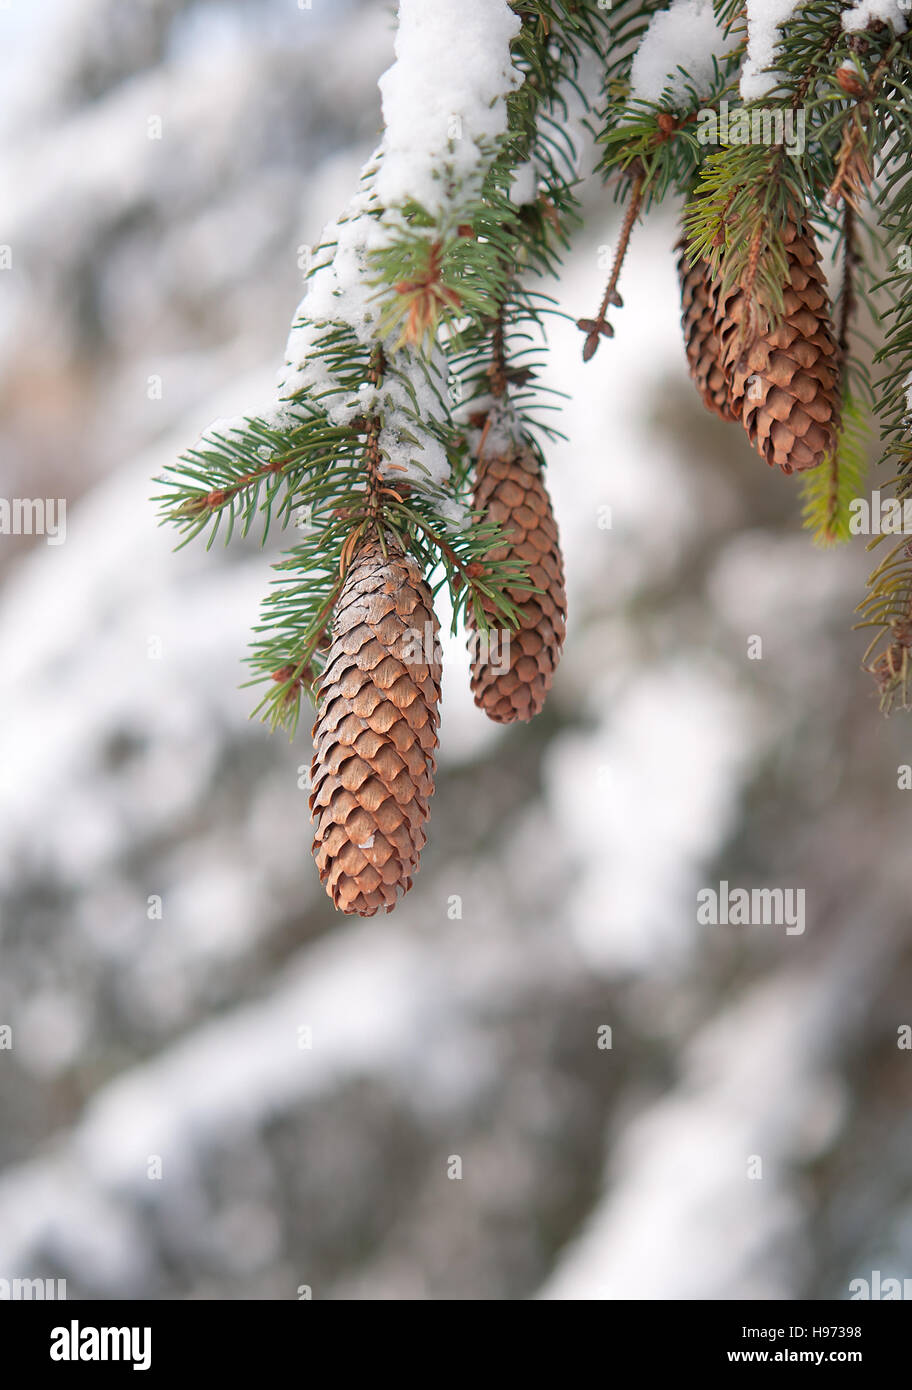 snow on evergreen branches Stock Photo